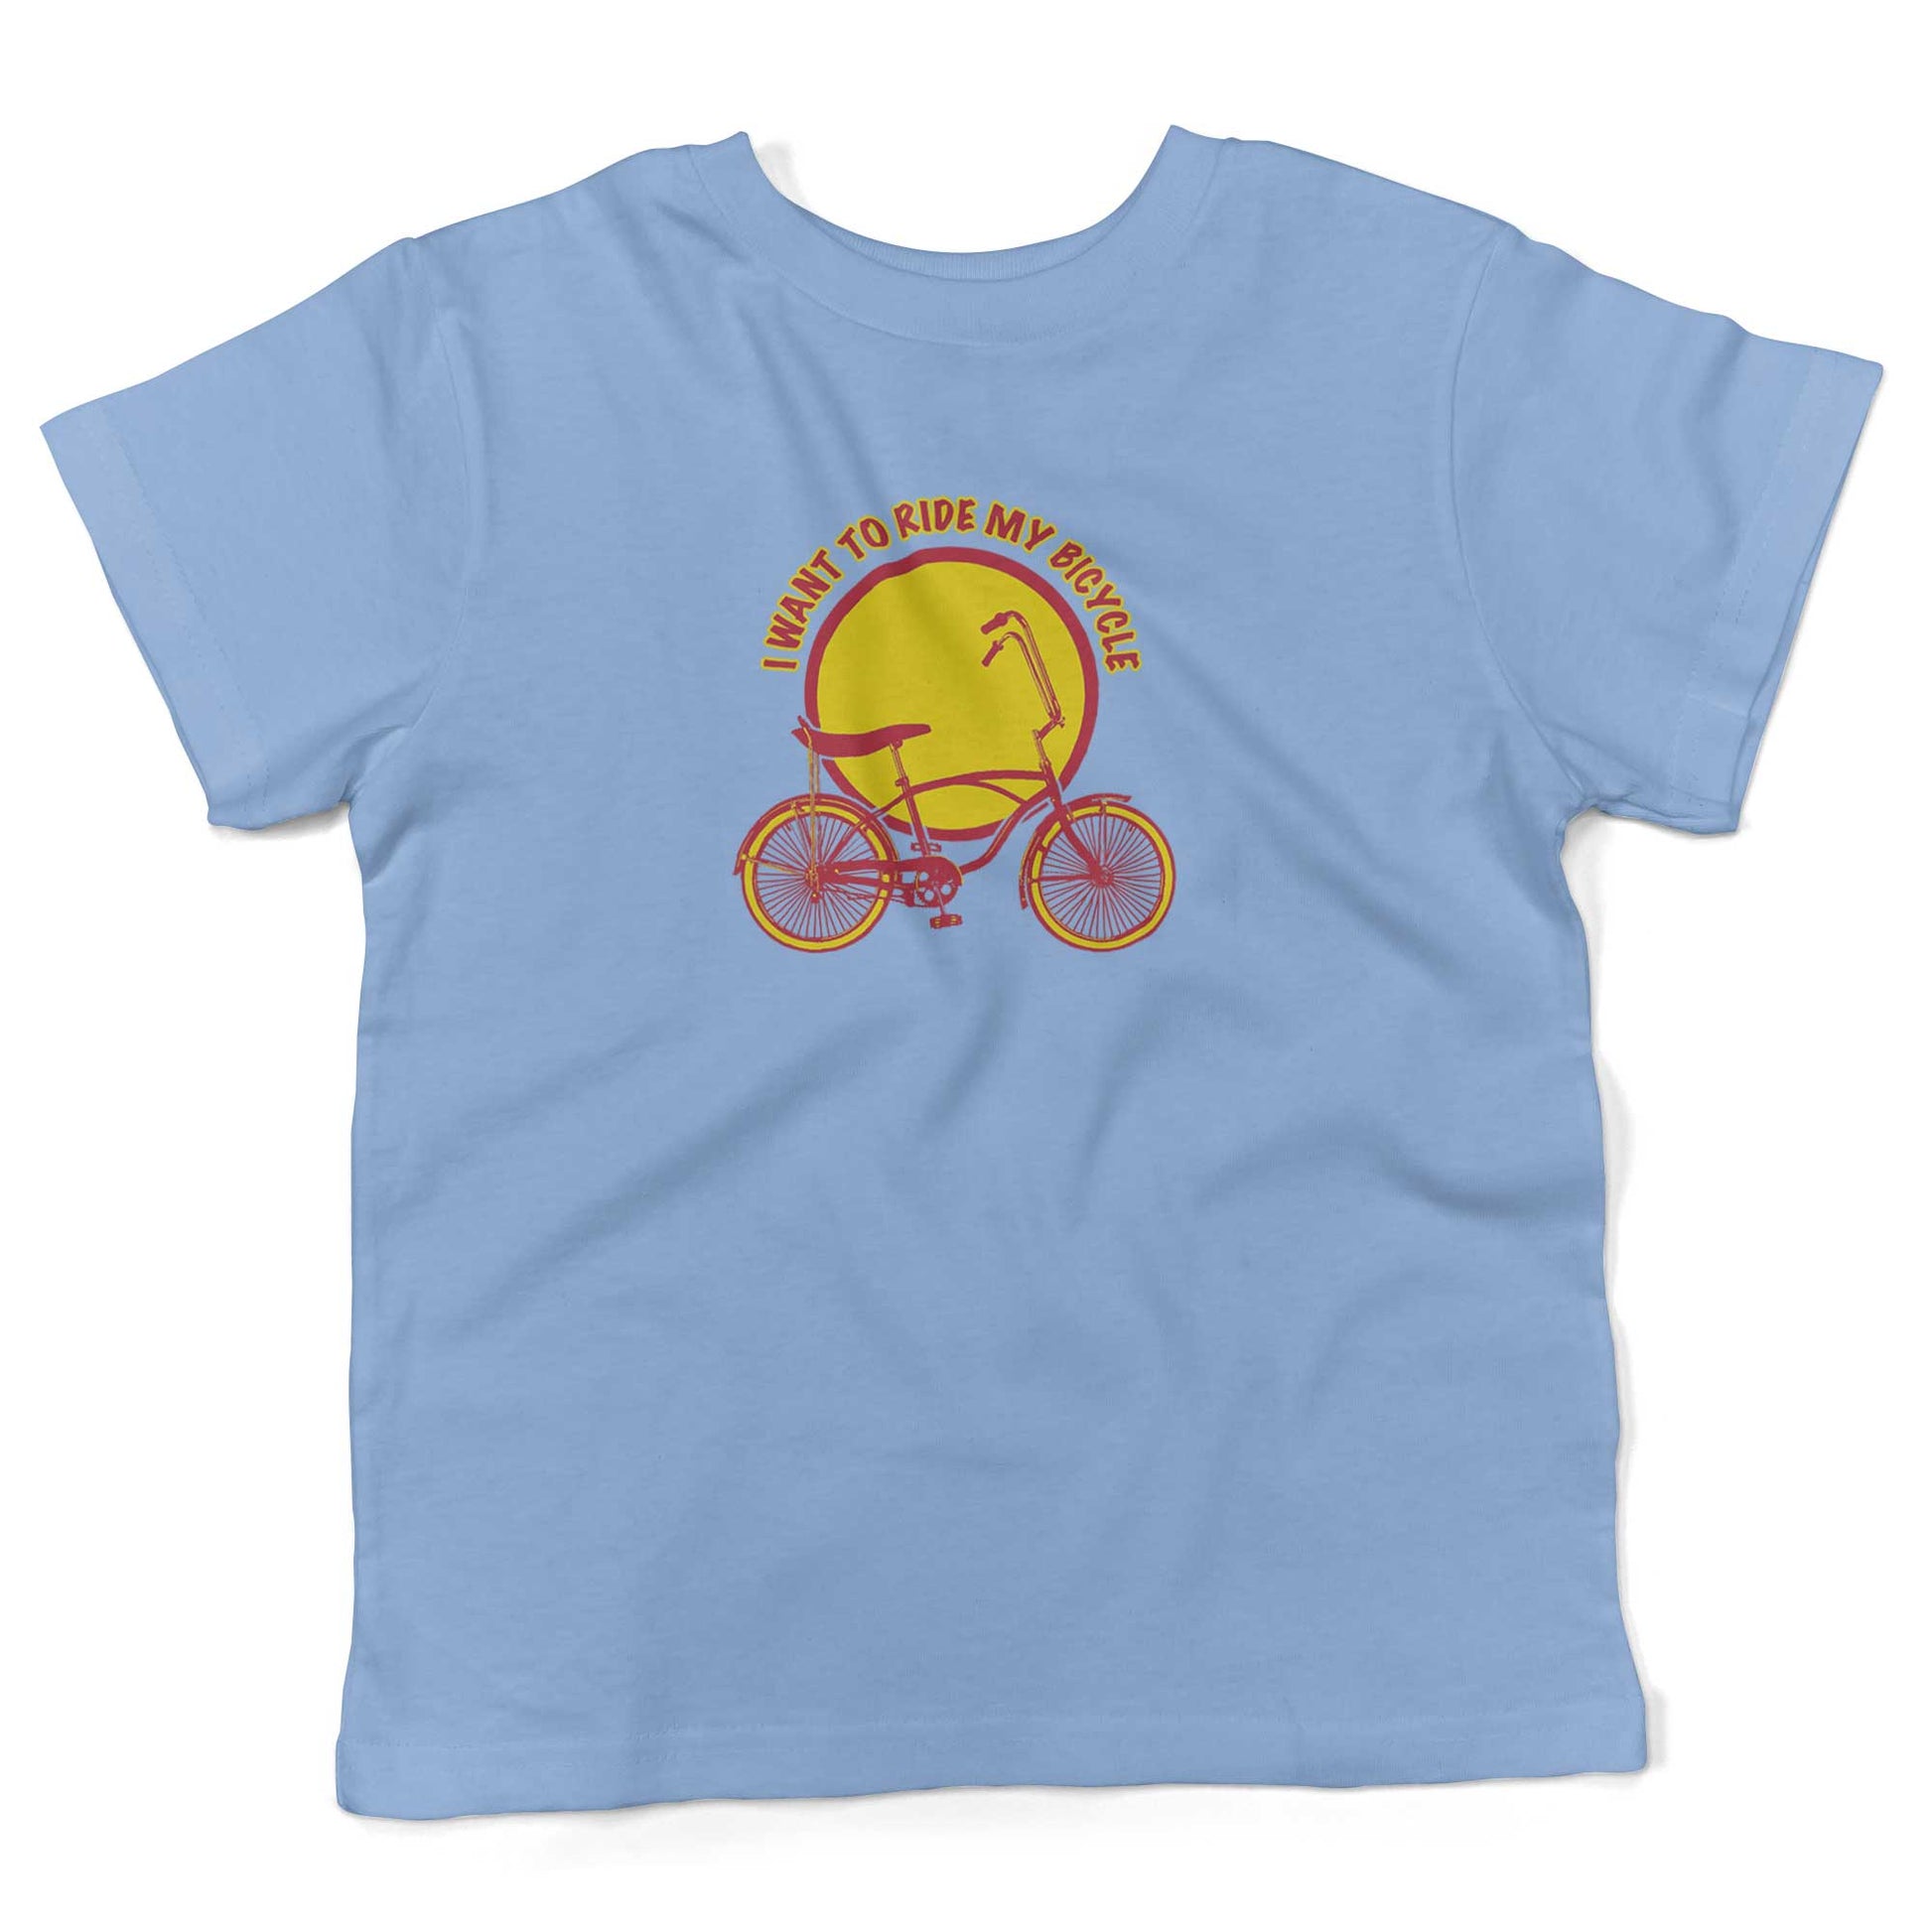 I Want To Ride My Bicycle Toddler Shirt-Organic Baby Blue-2T